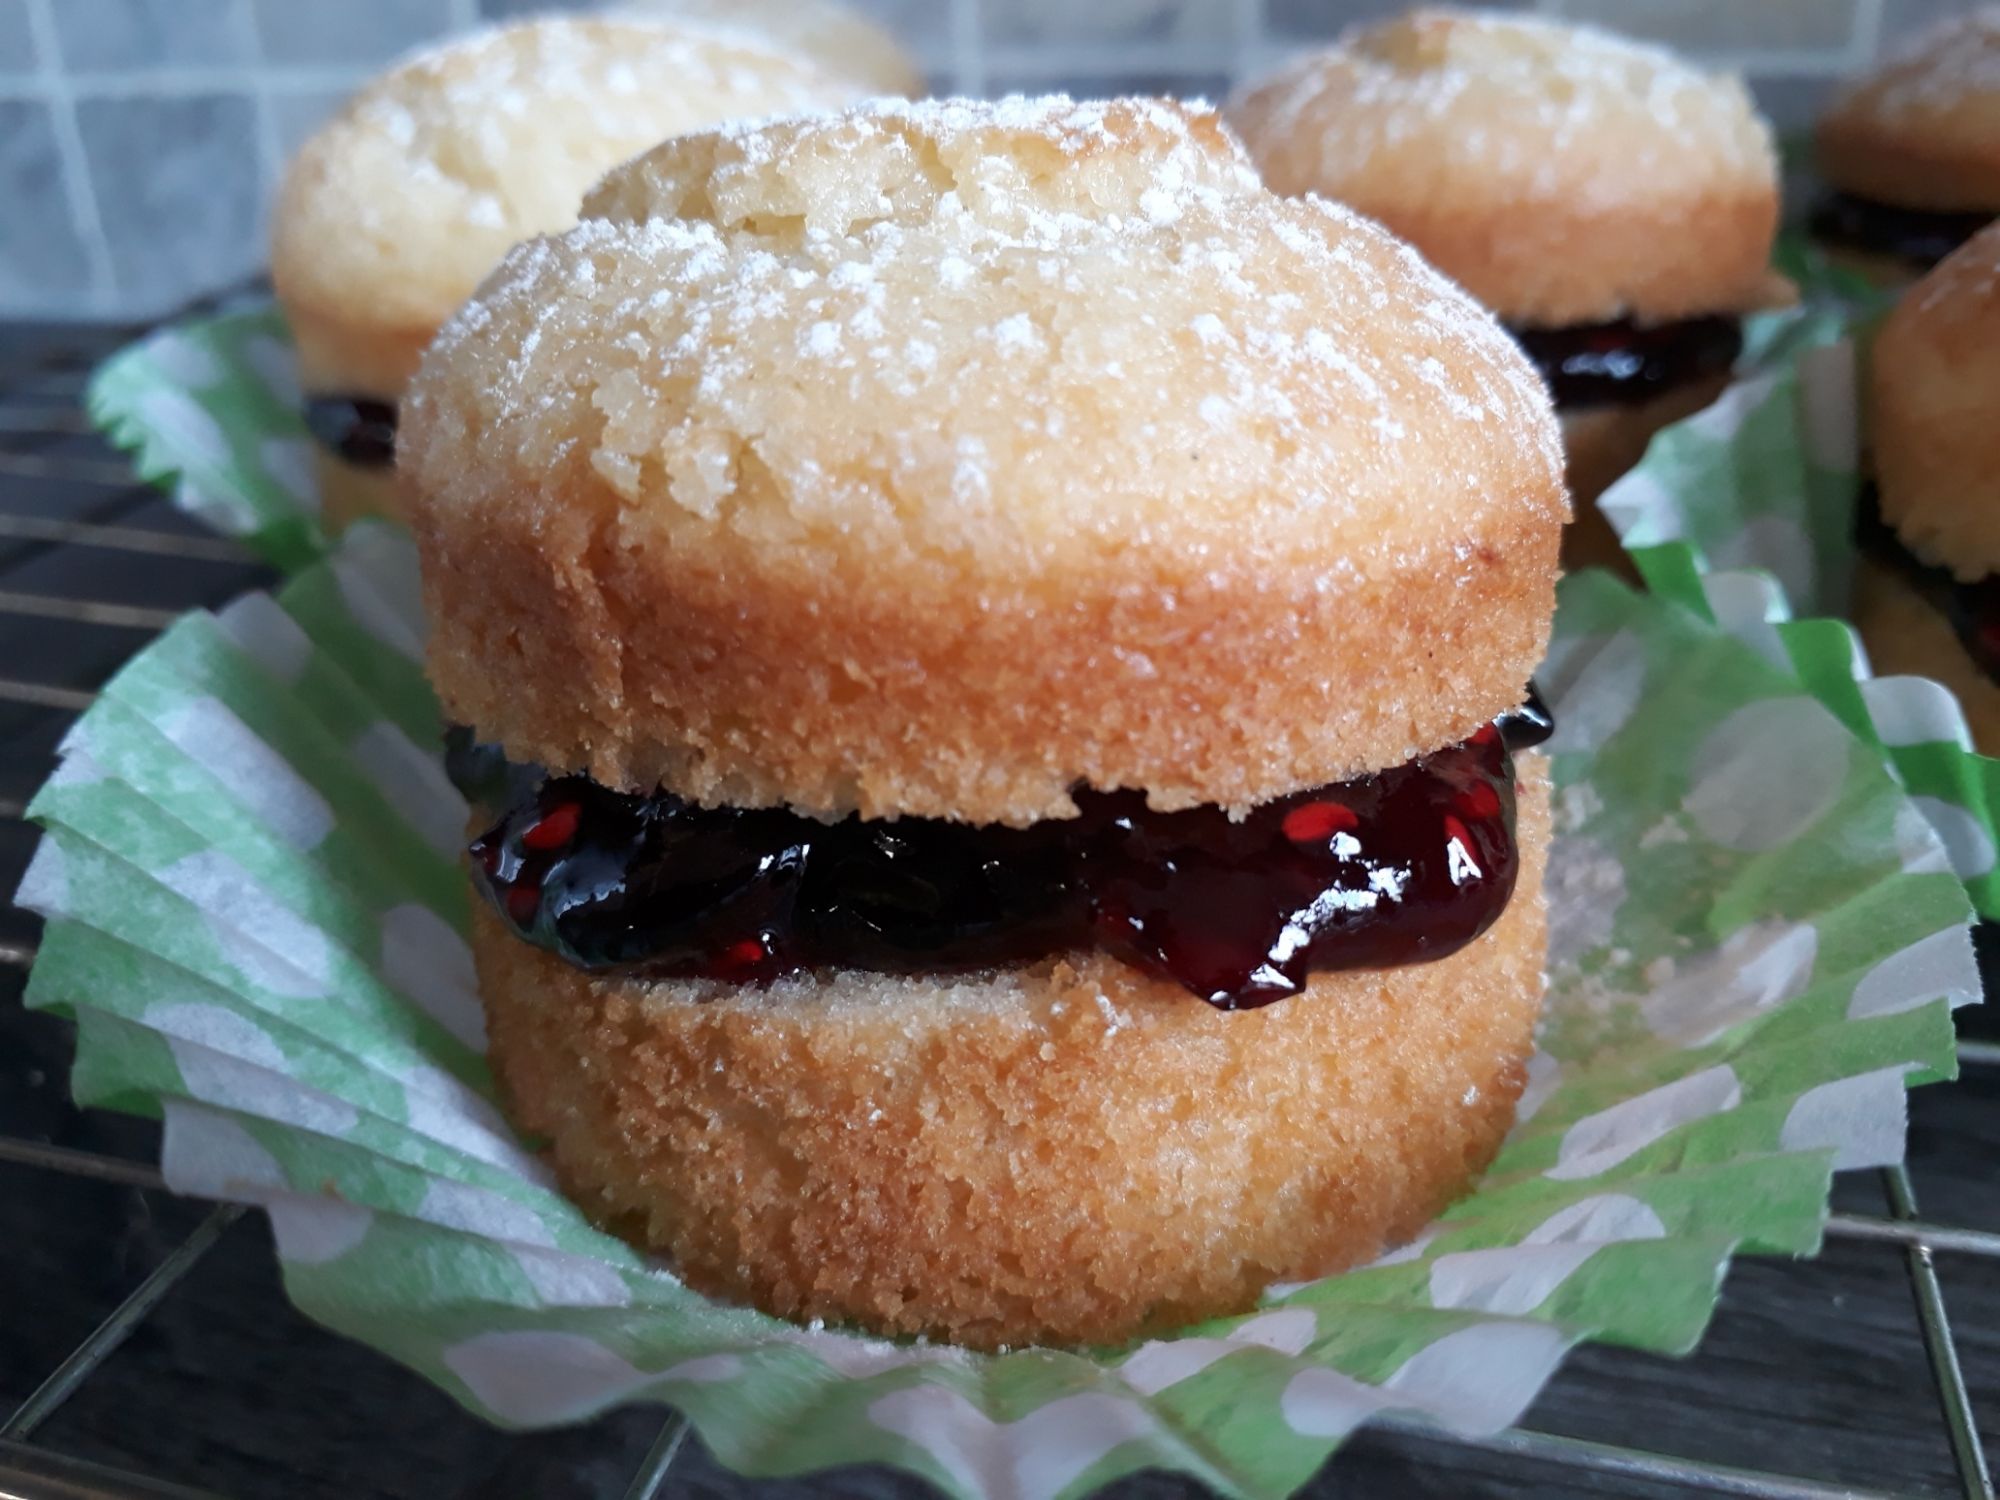 Victoria Sponges made with gluten free flour no eggs or dairy